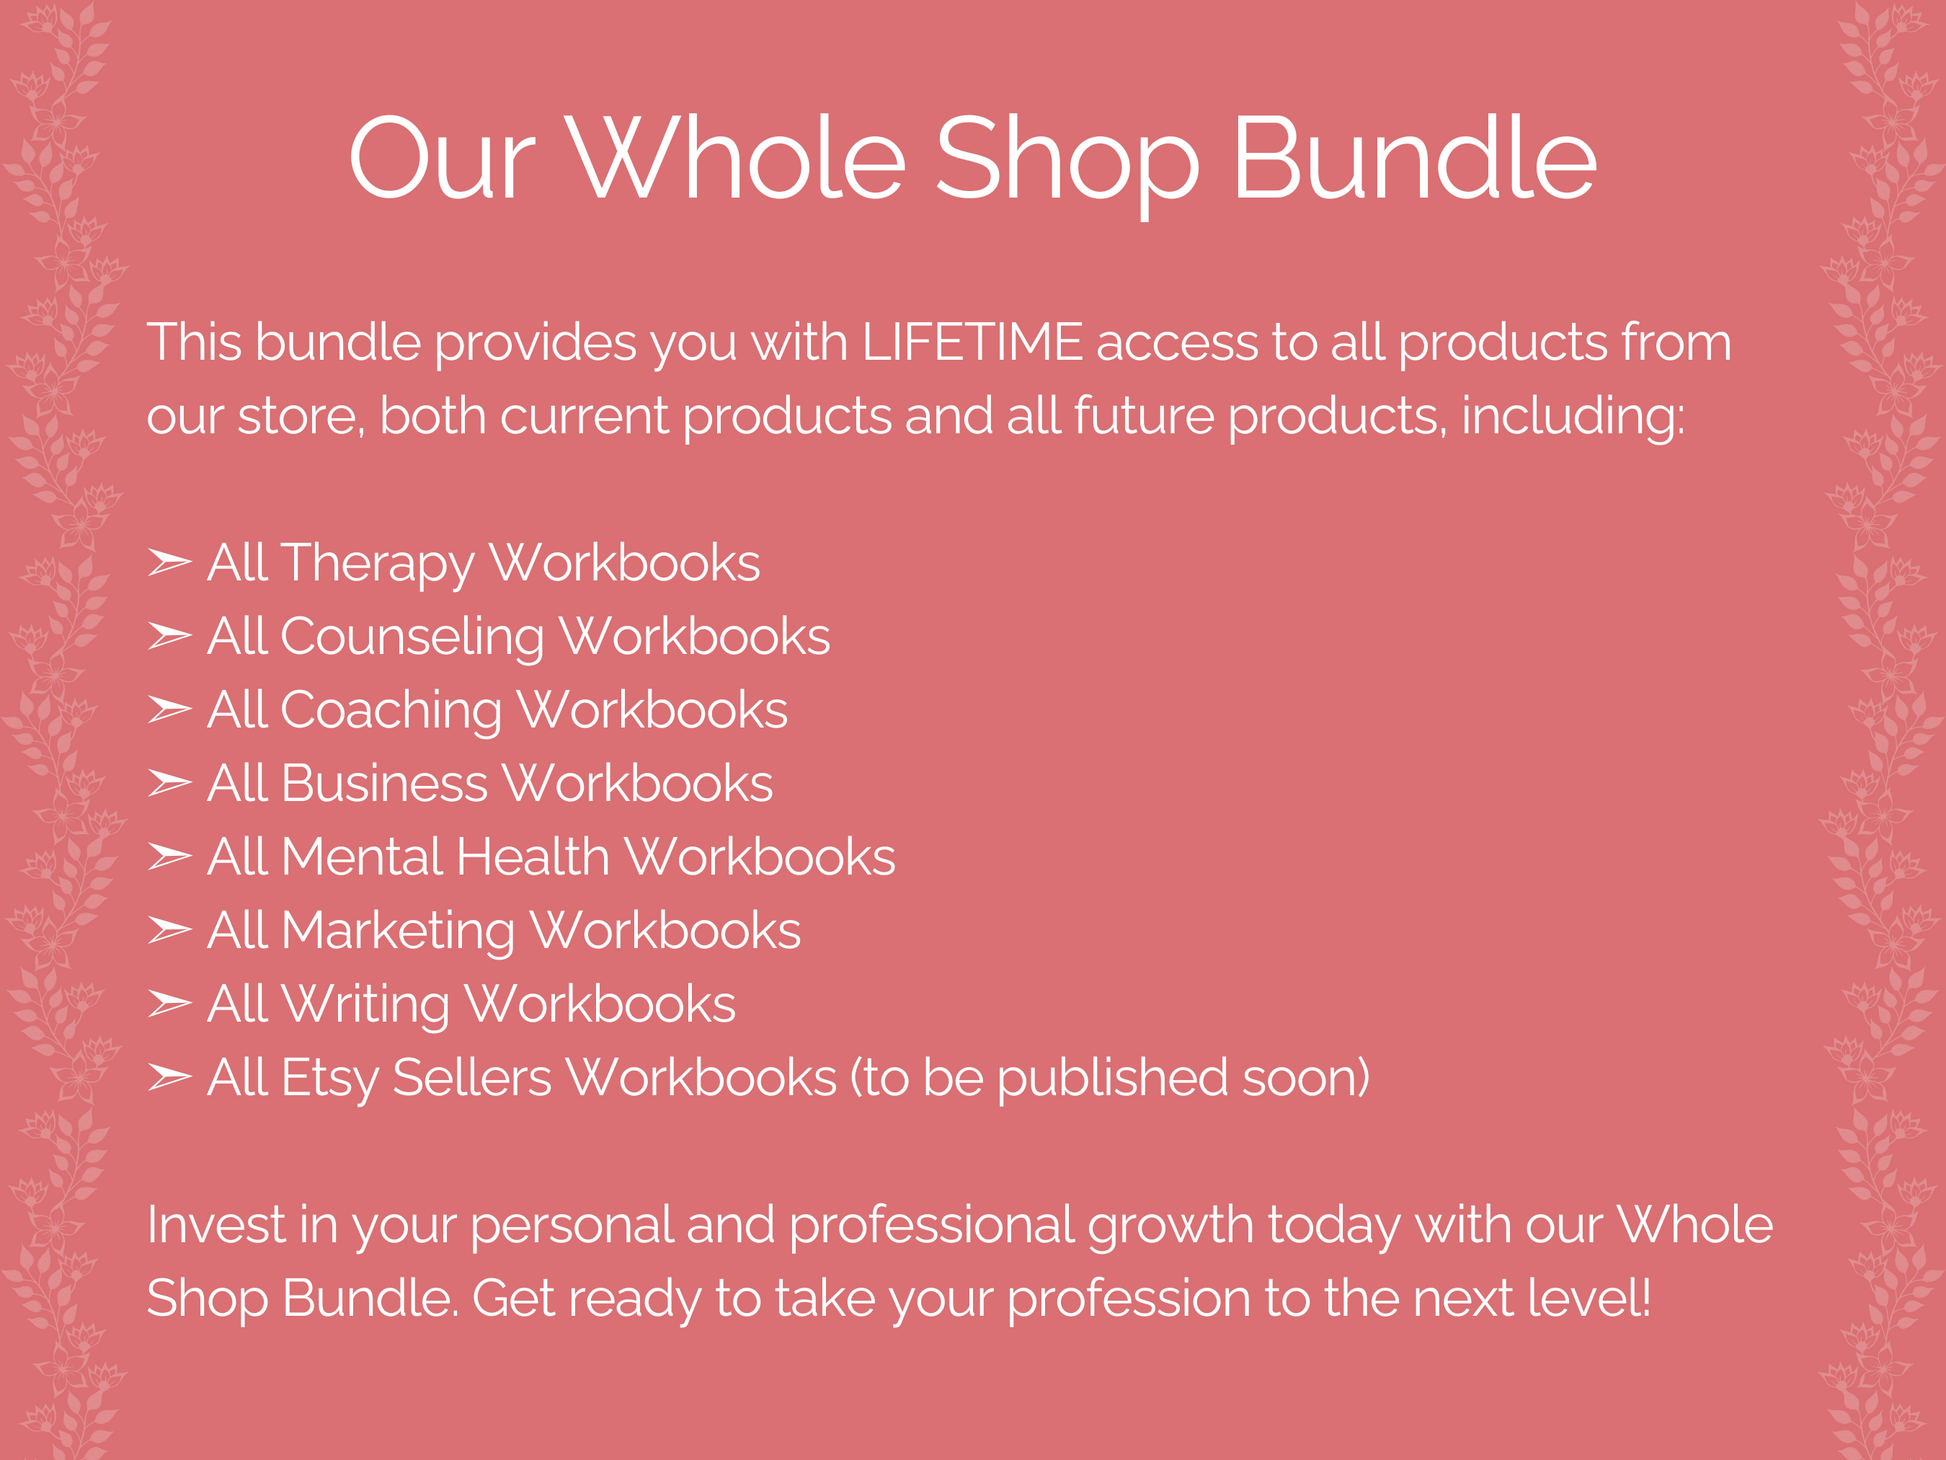 bundle, worksheet, workbook, therapy, counseling, mental health, coaching, marketing, resource, business, writing, template, tool